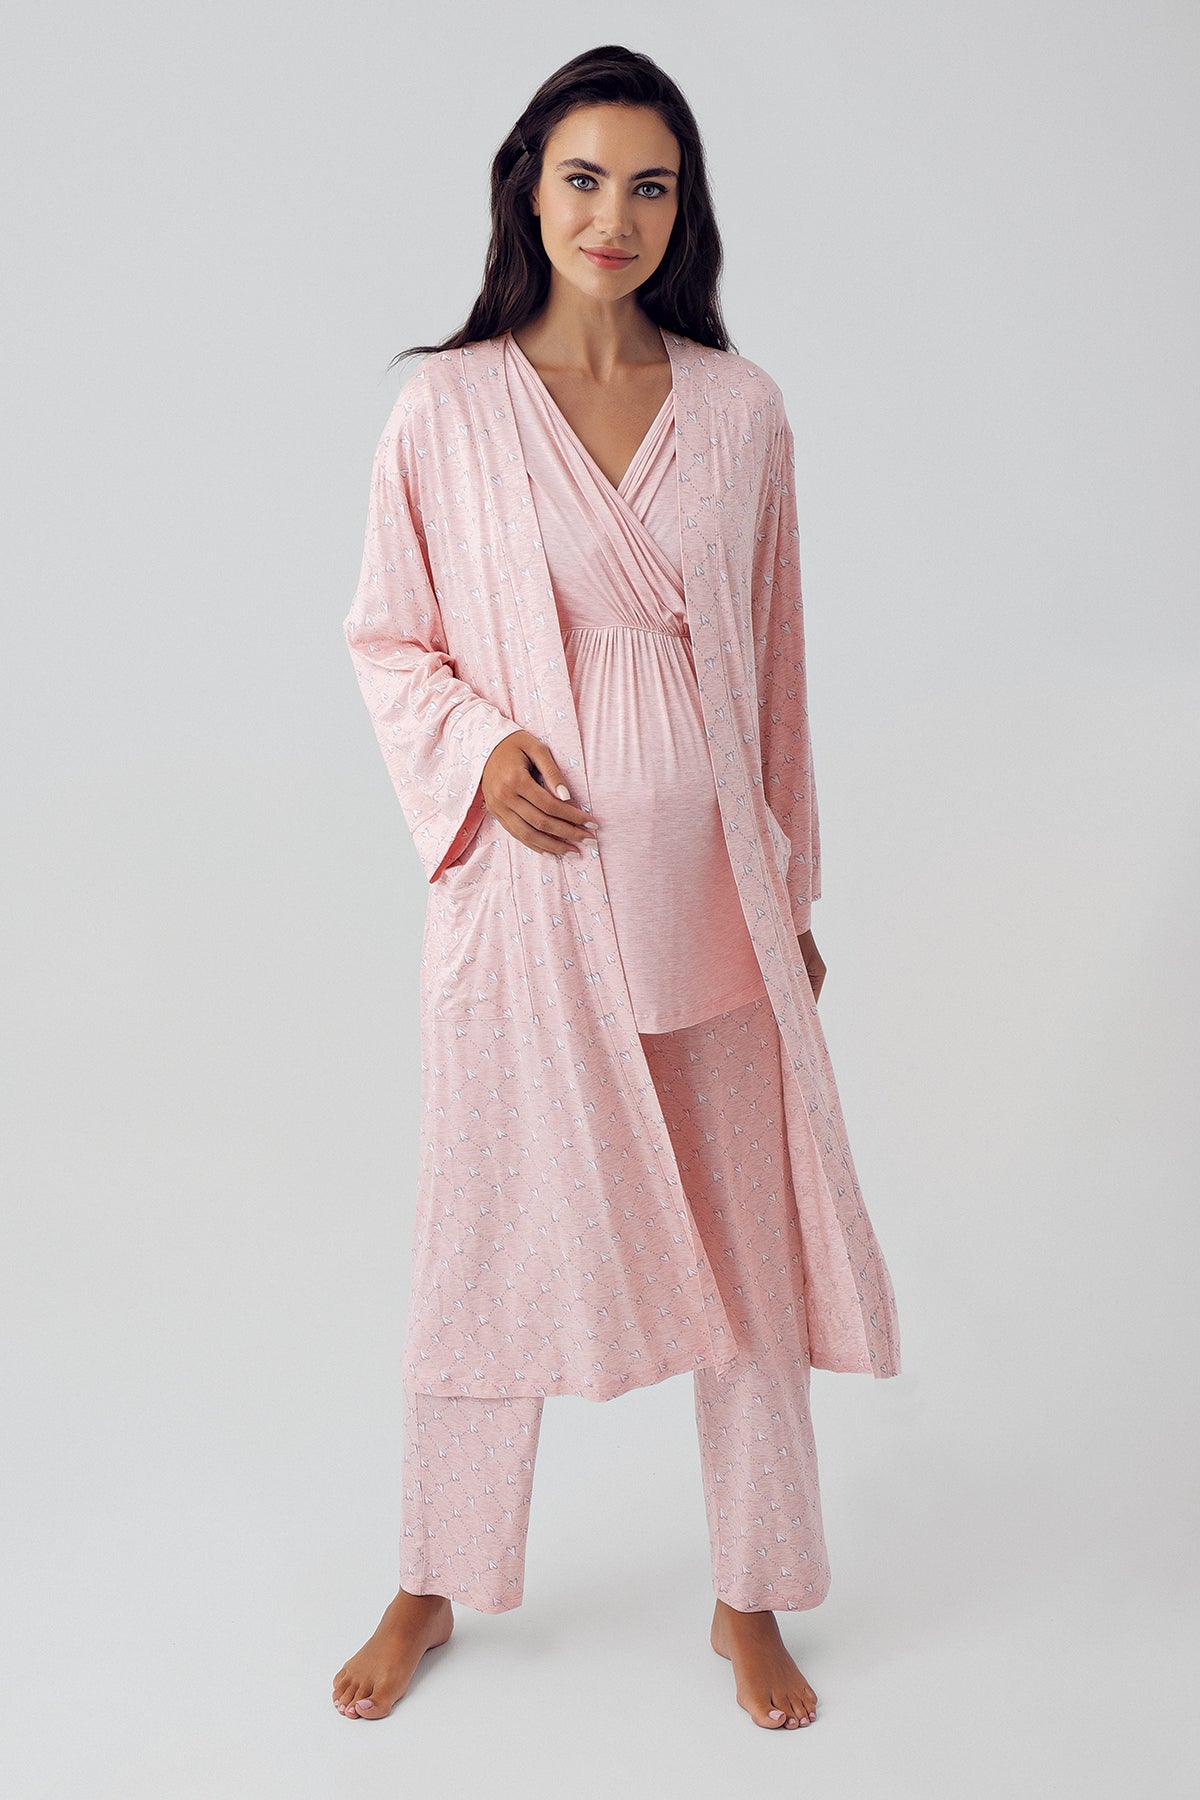 Shopymommy 15302 Double Breasted 3-Pieces Maternity & Nursing Pajamas With Polka Dot Robe Powder